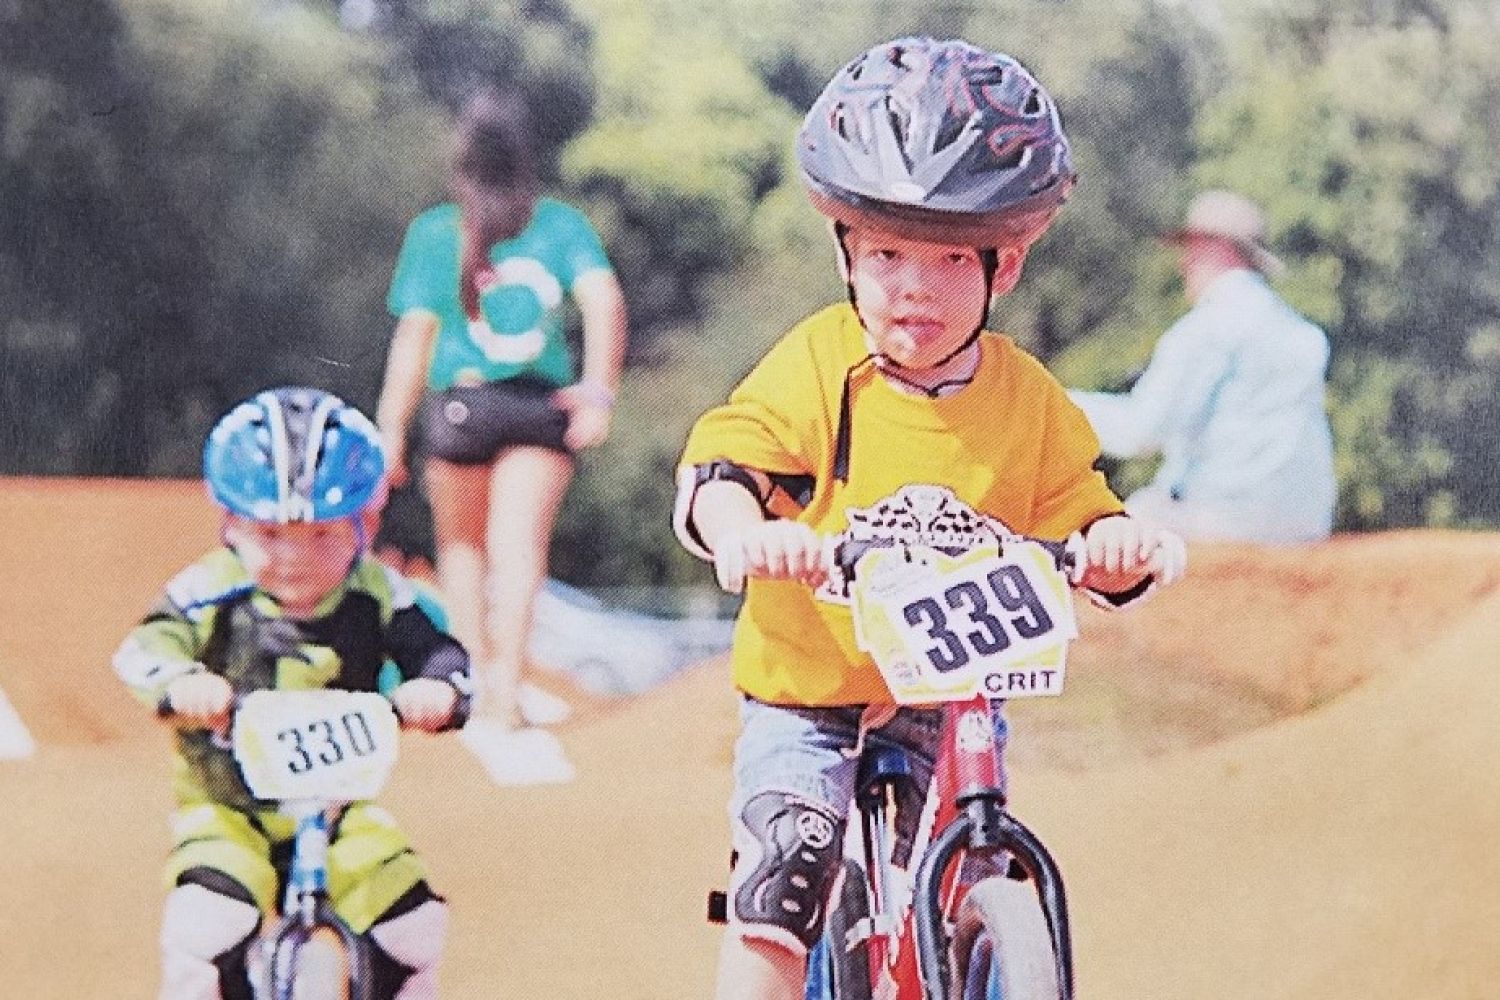 Young boy riding red 12 Classic in Strider Cup race